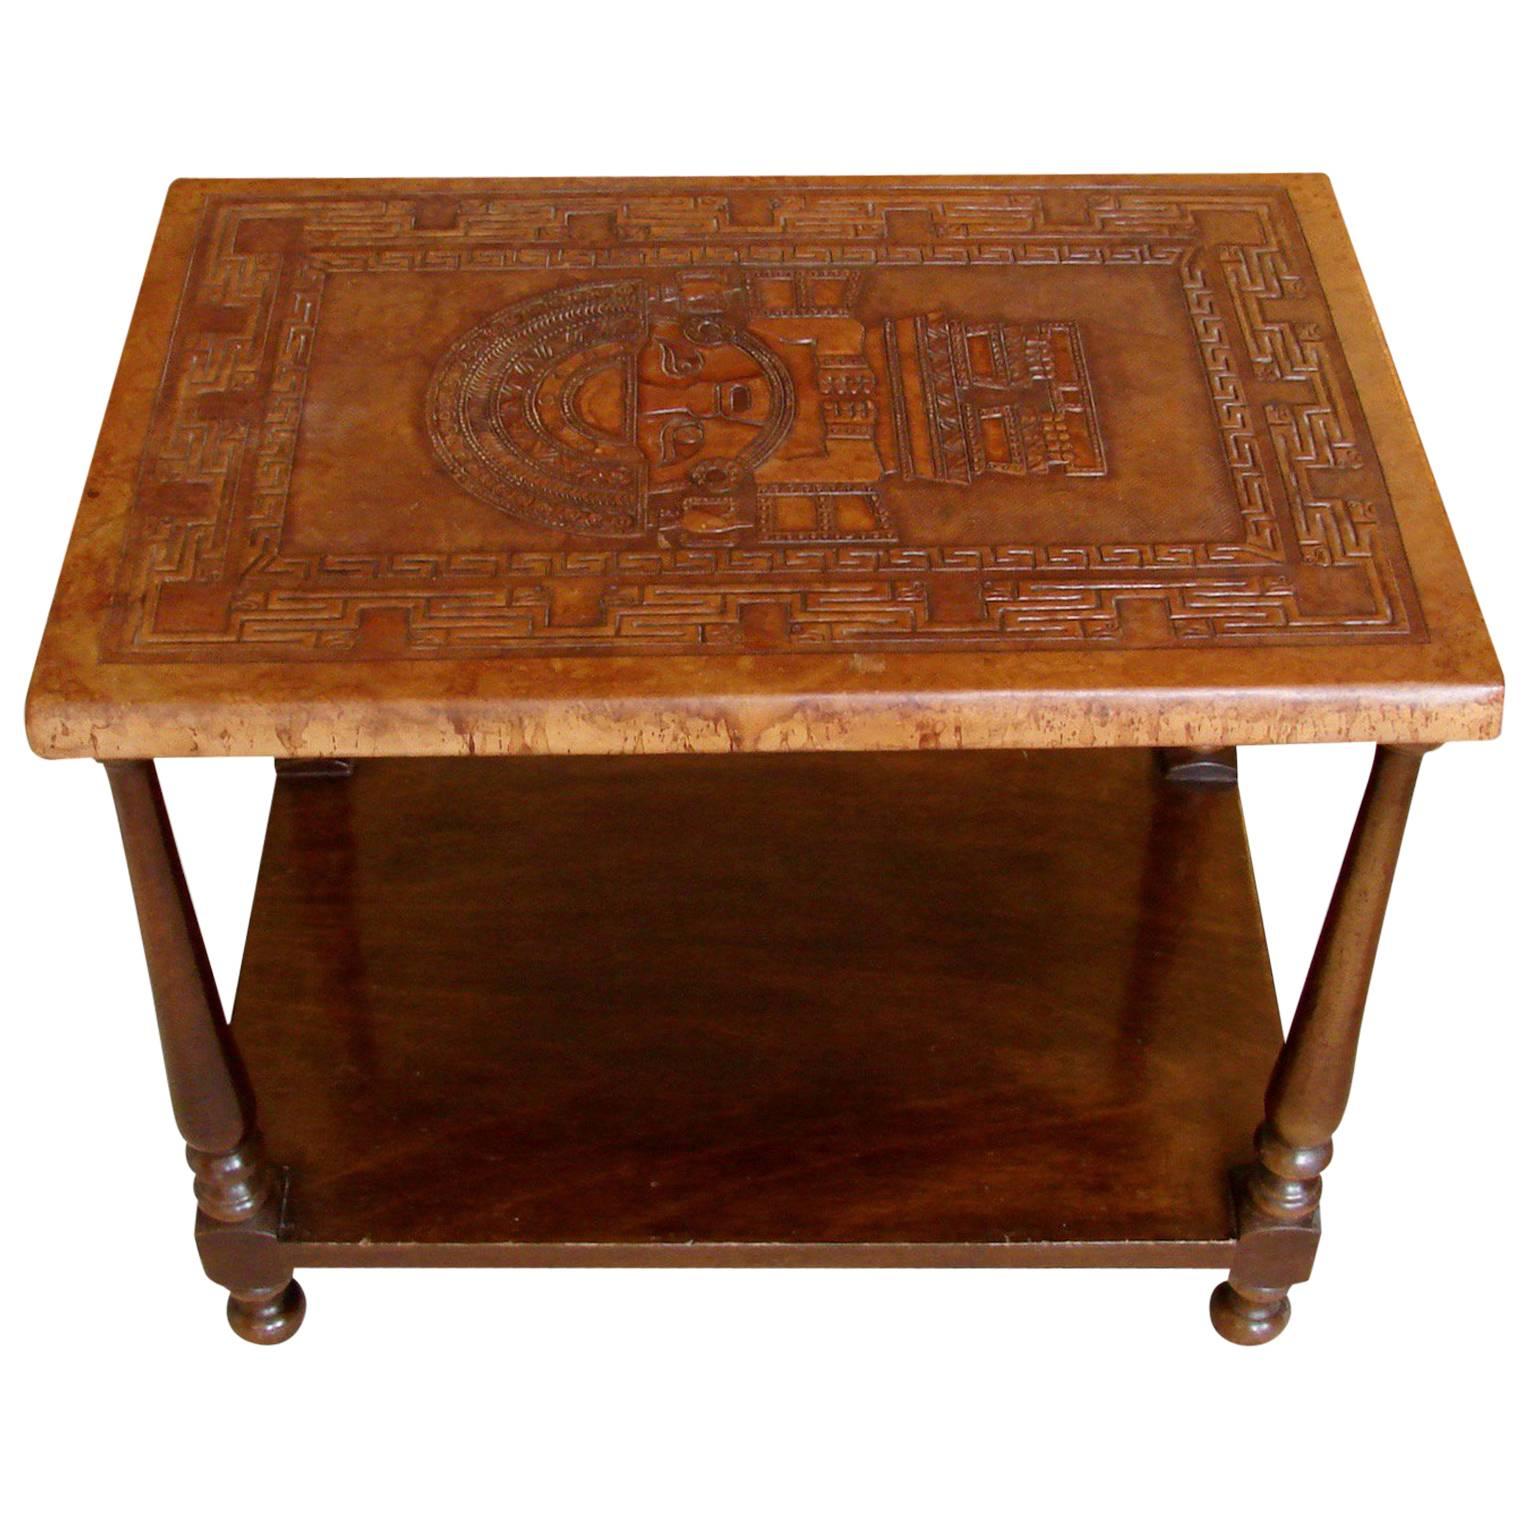 Mexican Tooled Leather-Topped Hardwood Occasional Table with Lower Shelf